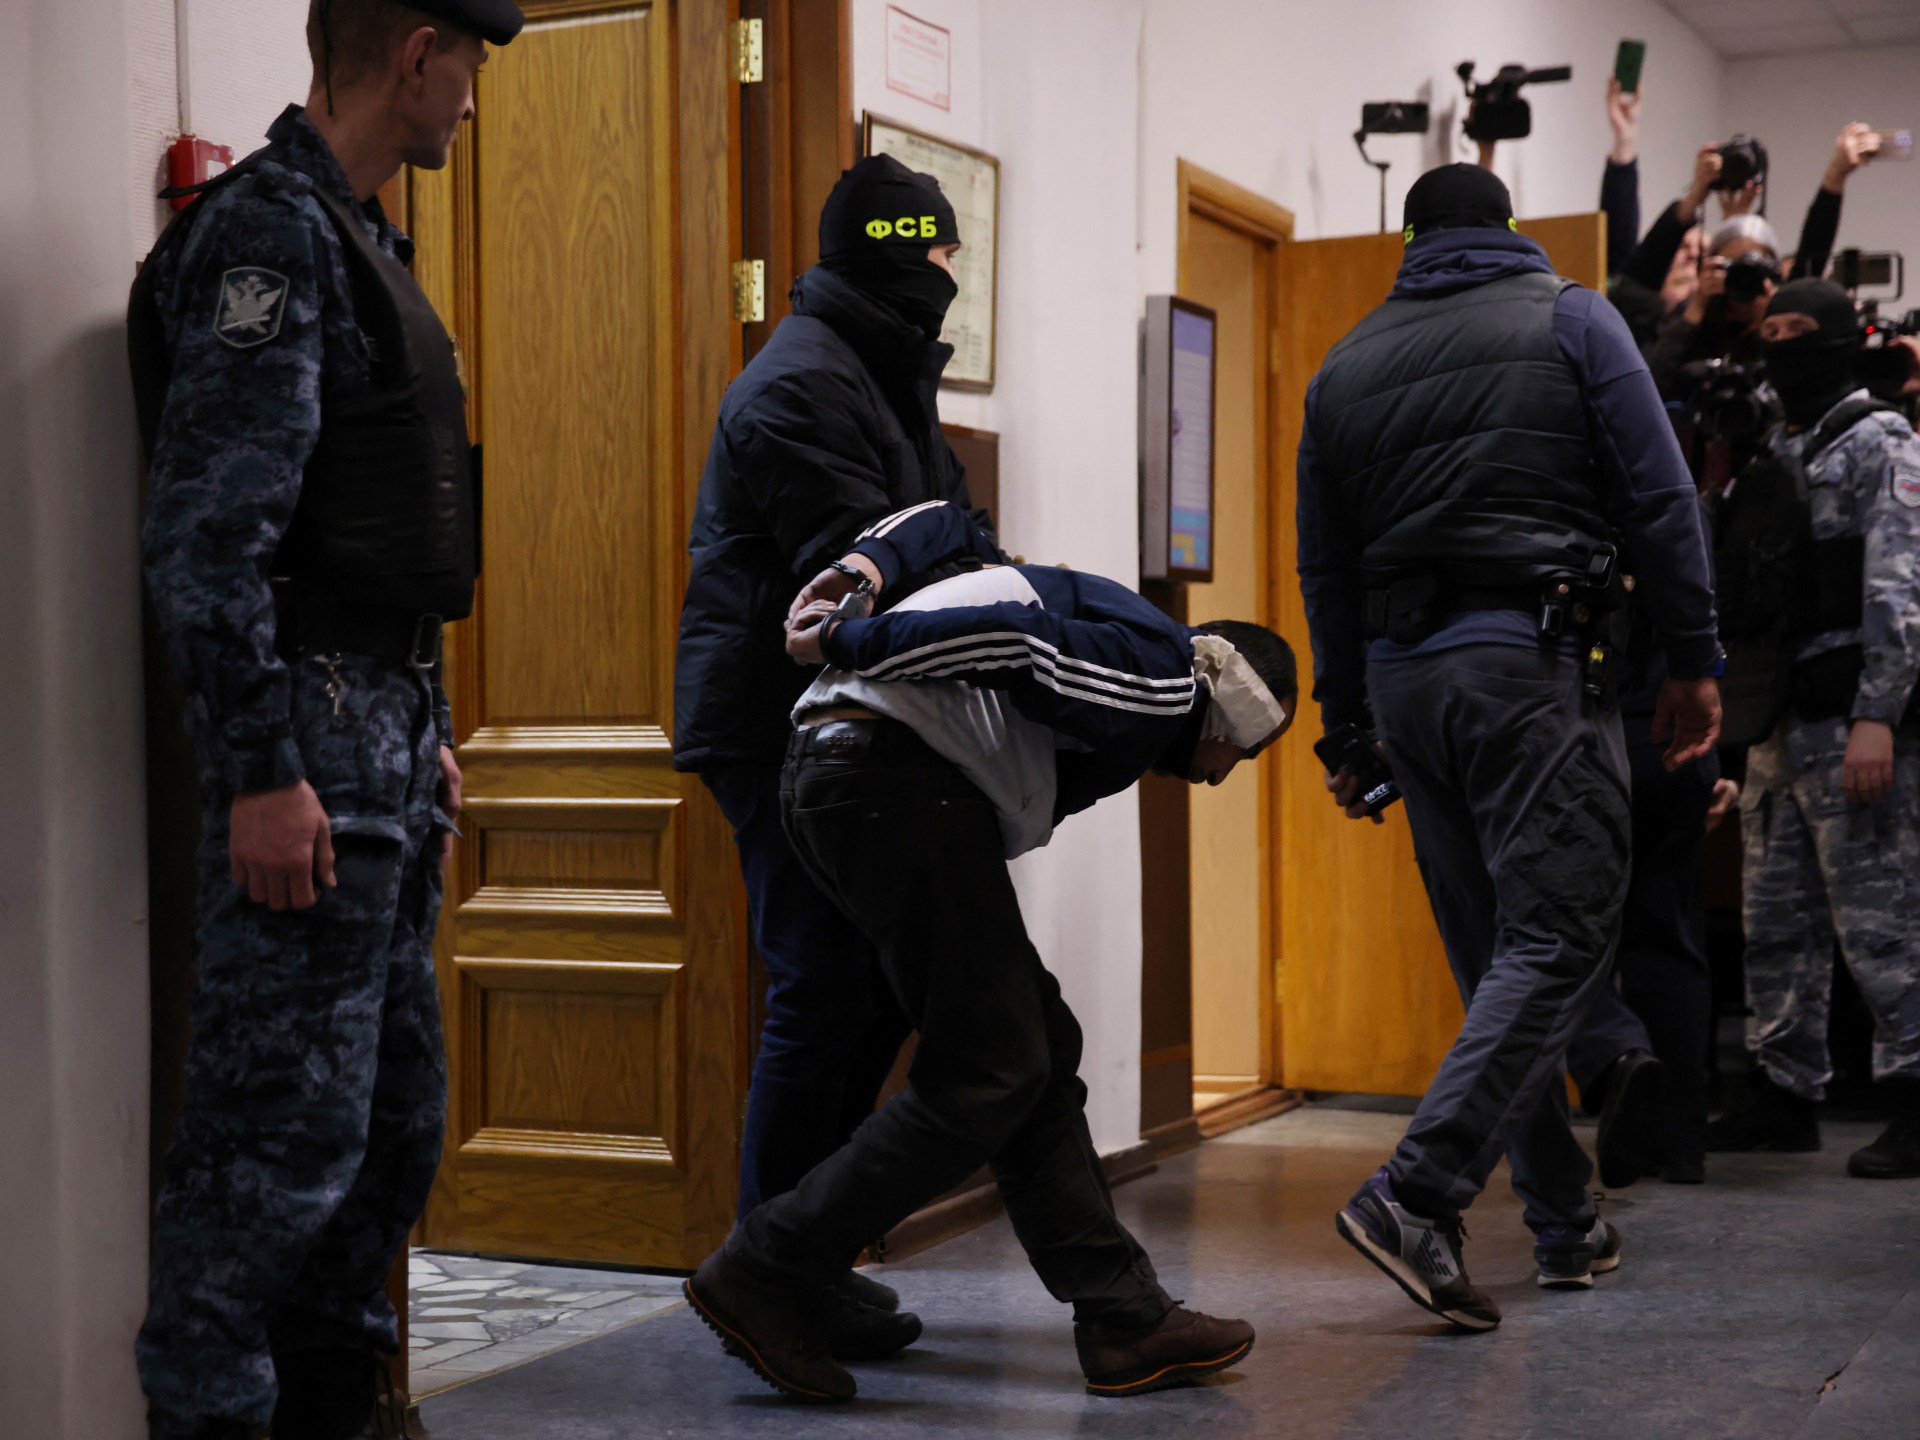 Four men showing signs of severe beating charged over Moscow concert attack  | ISIL/ISIS News | Al Jazeera